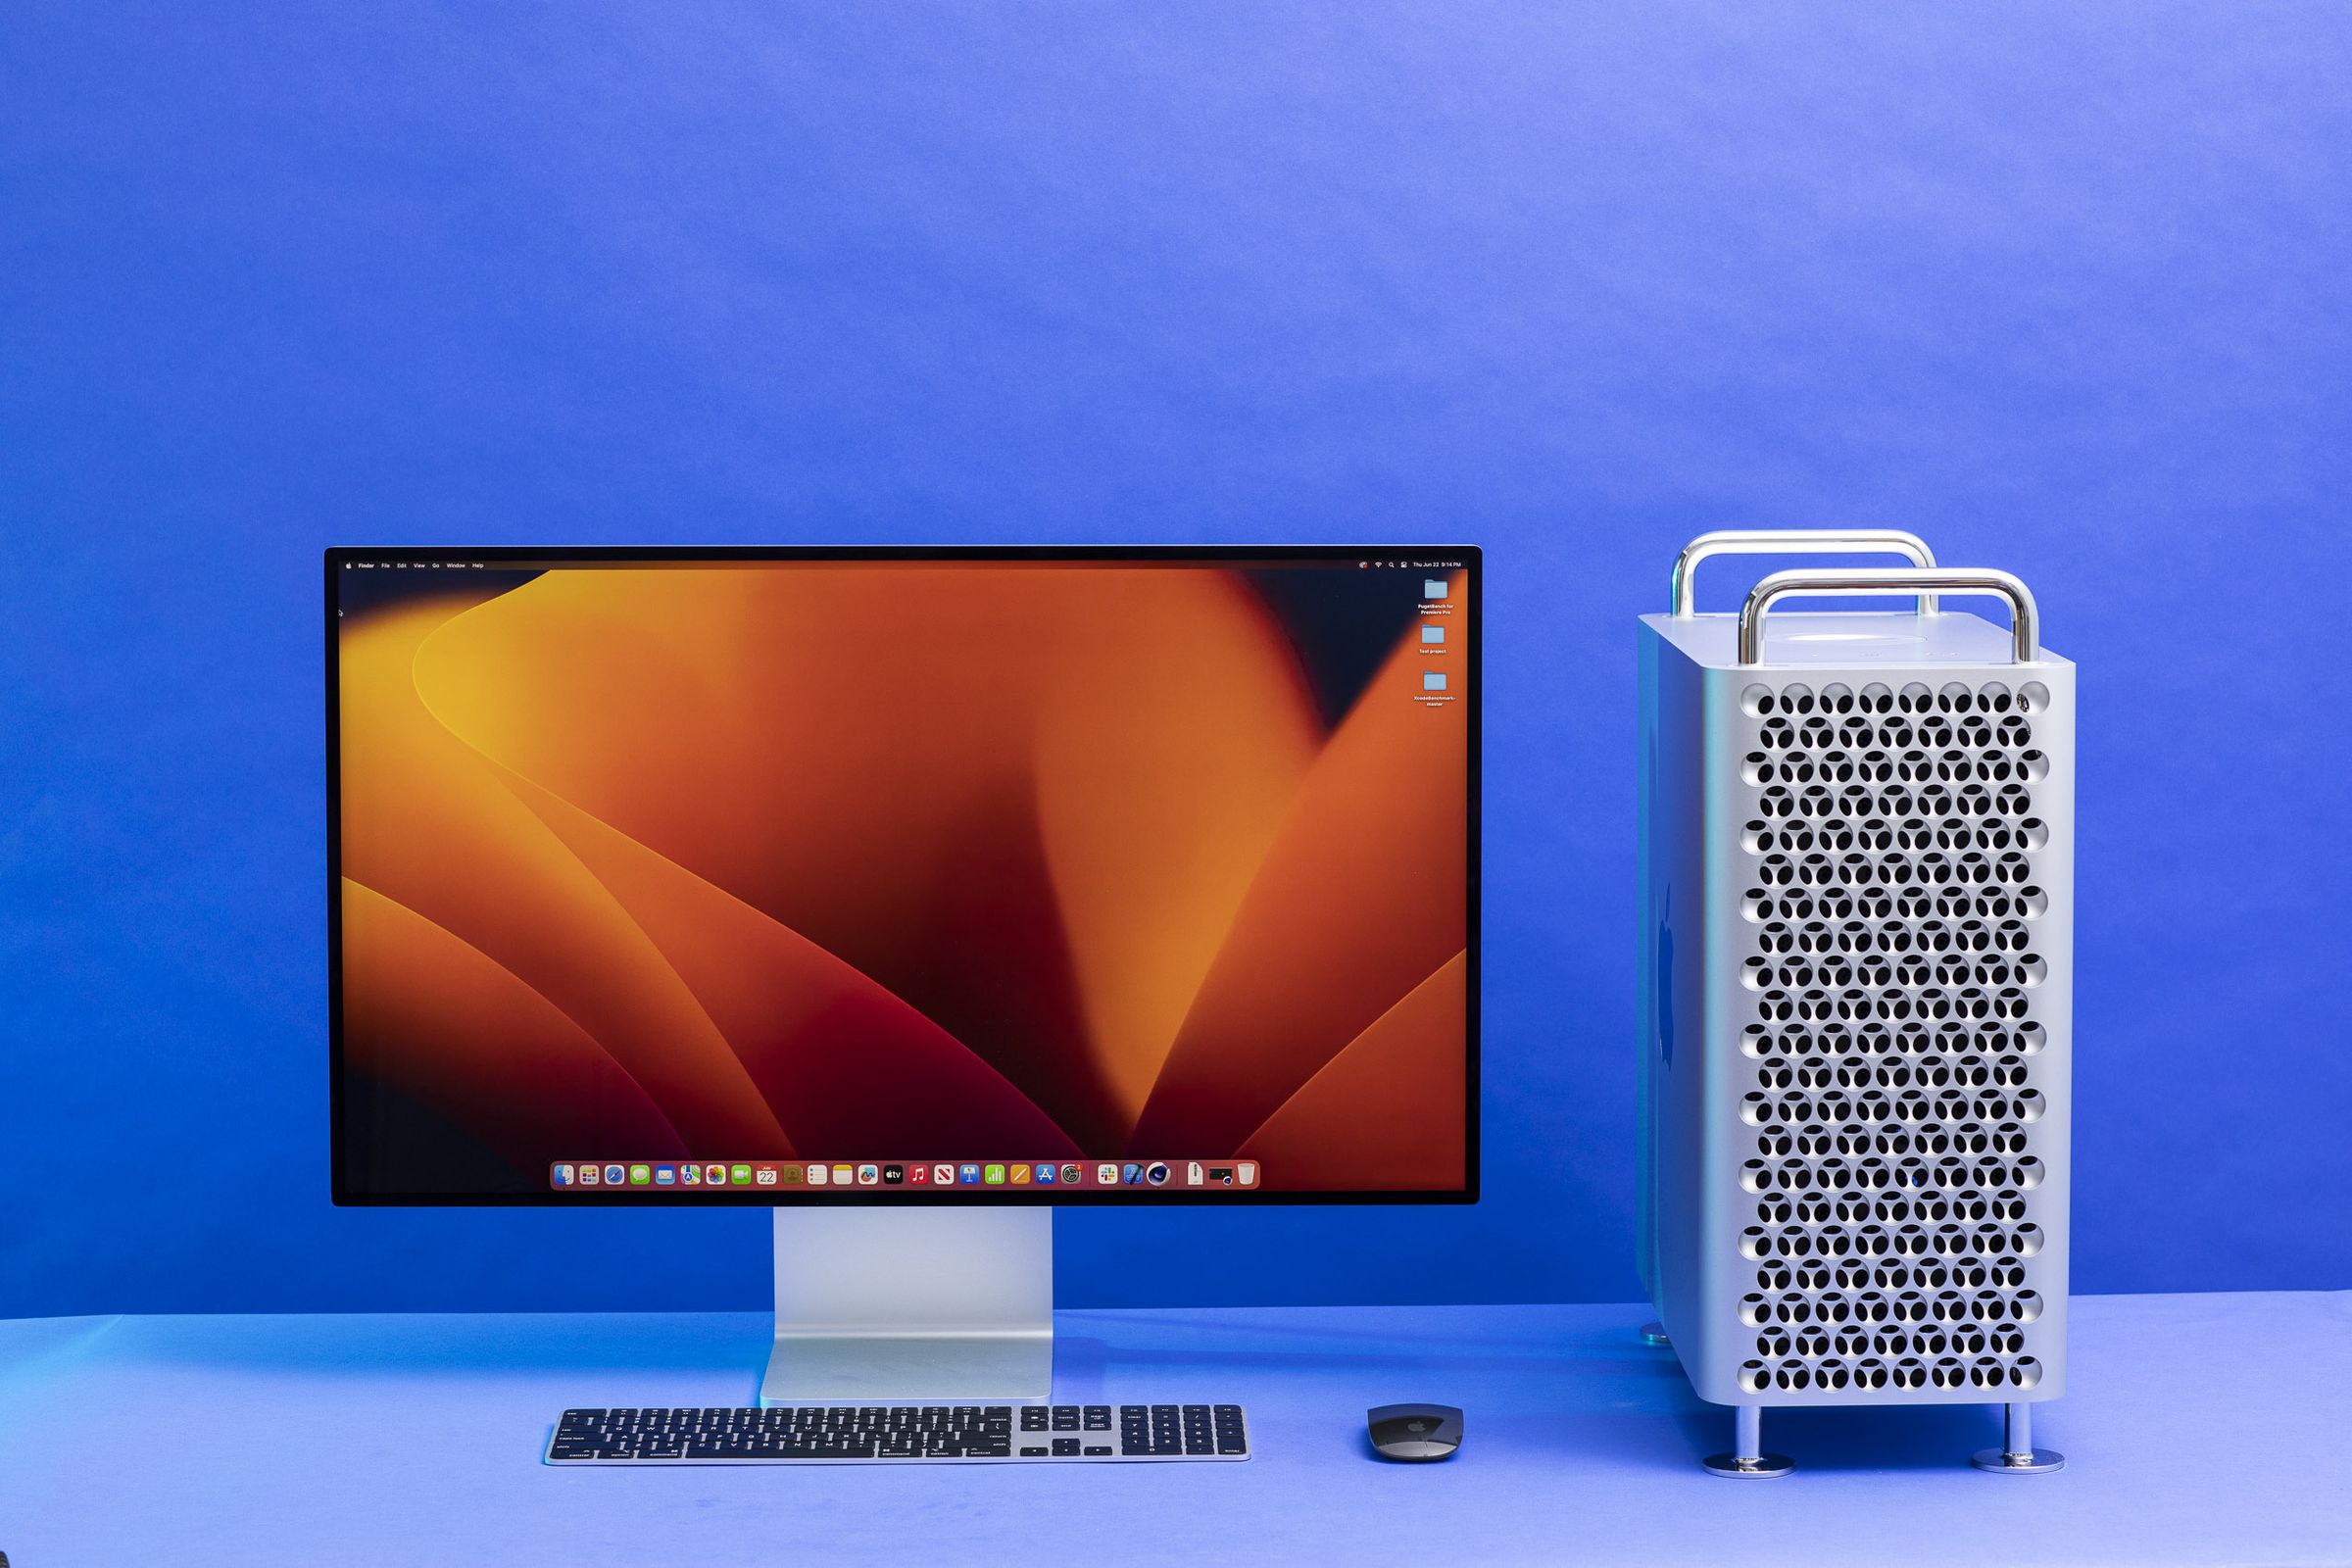 The Mac Pro beside the Pro Display XDR, a magic keyboard, and magic mouse.